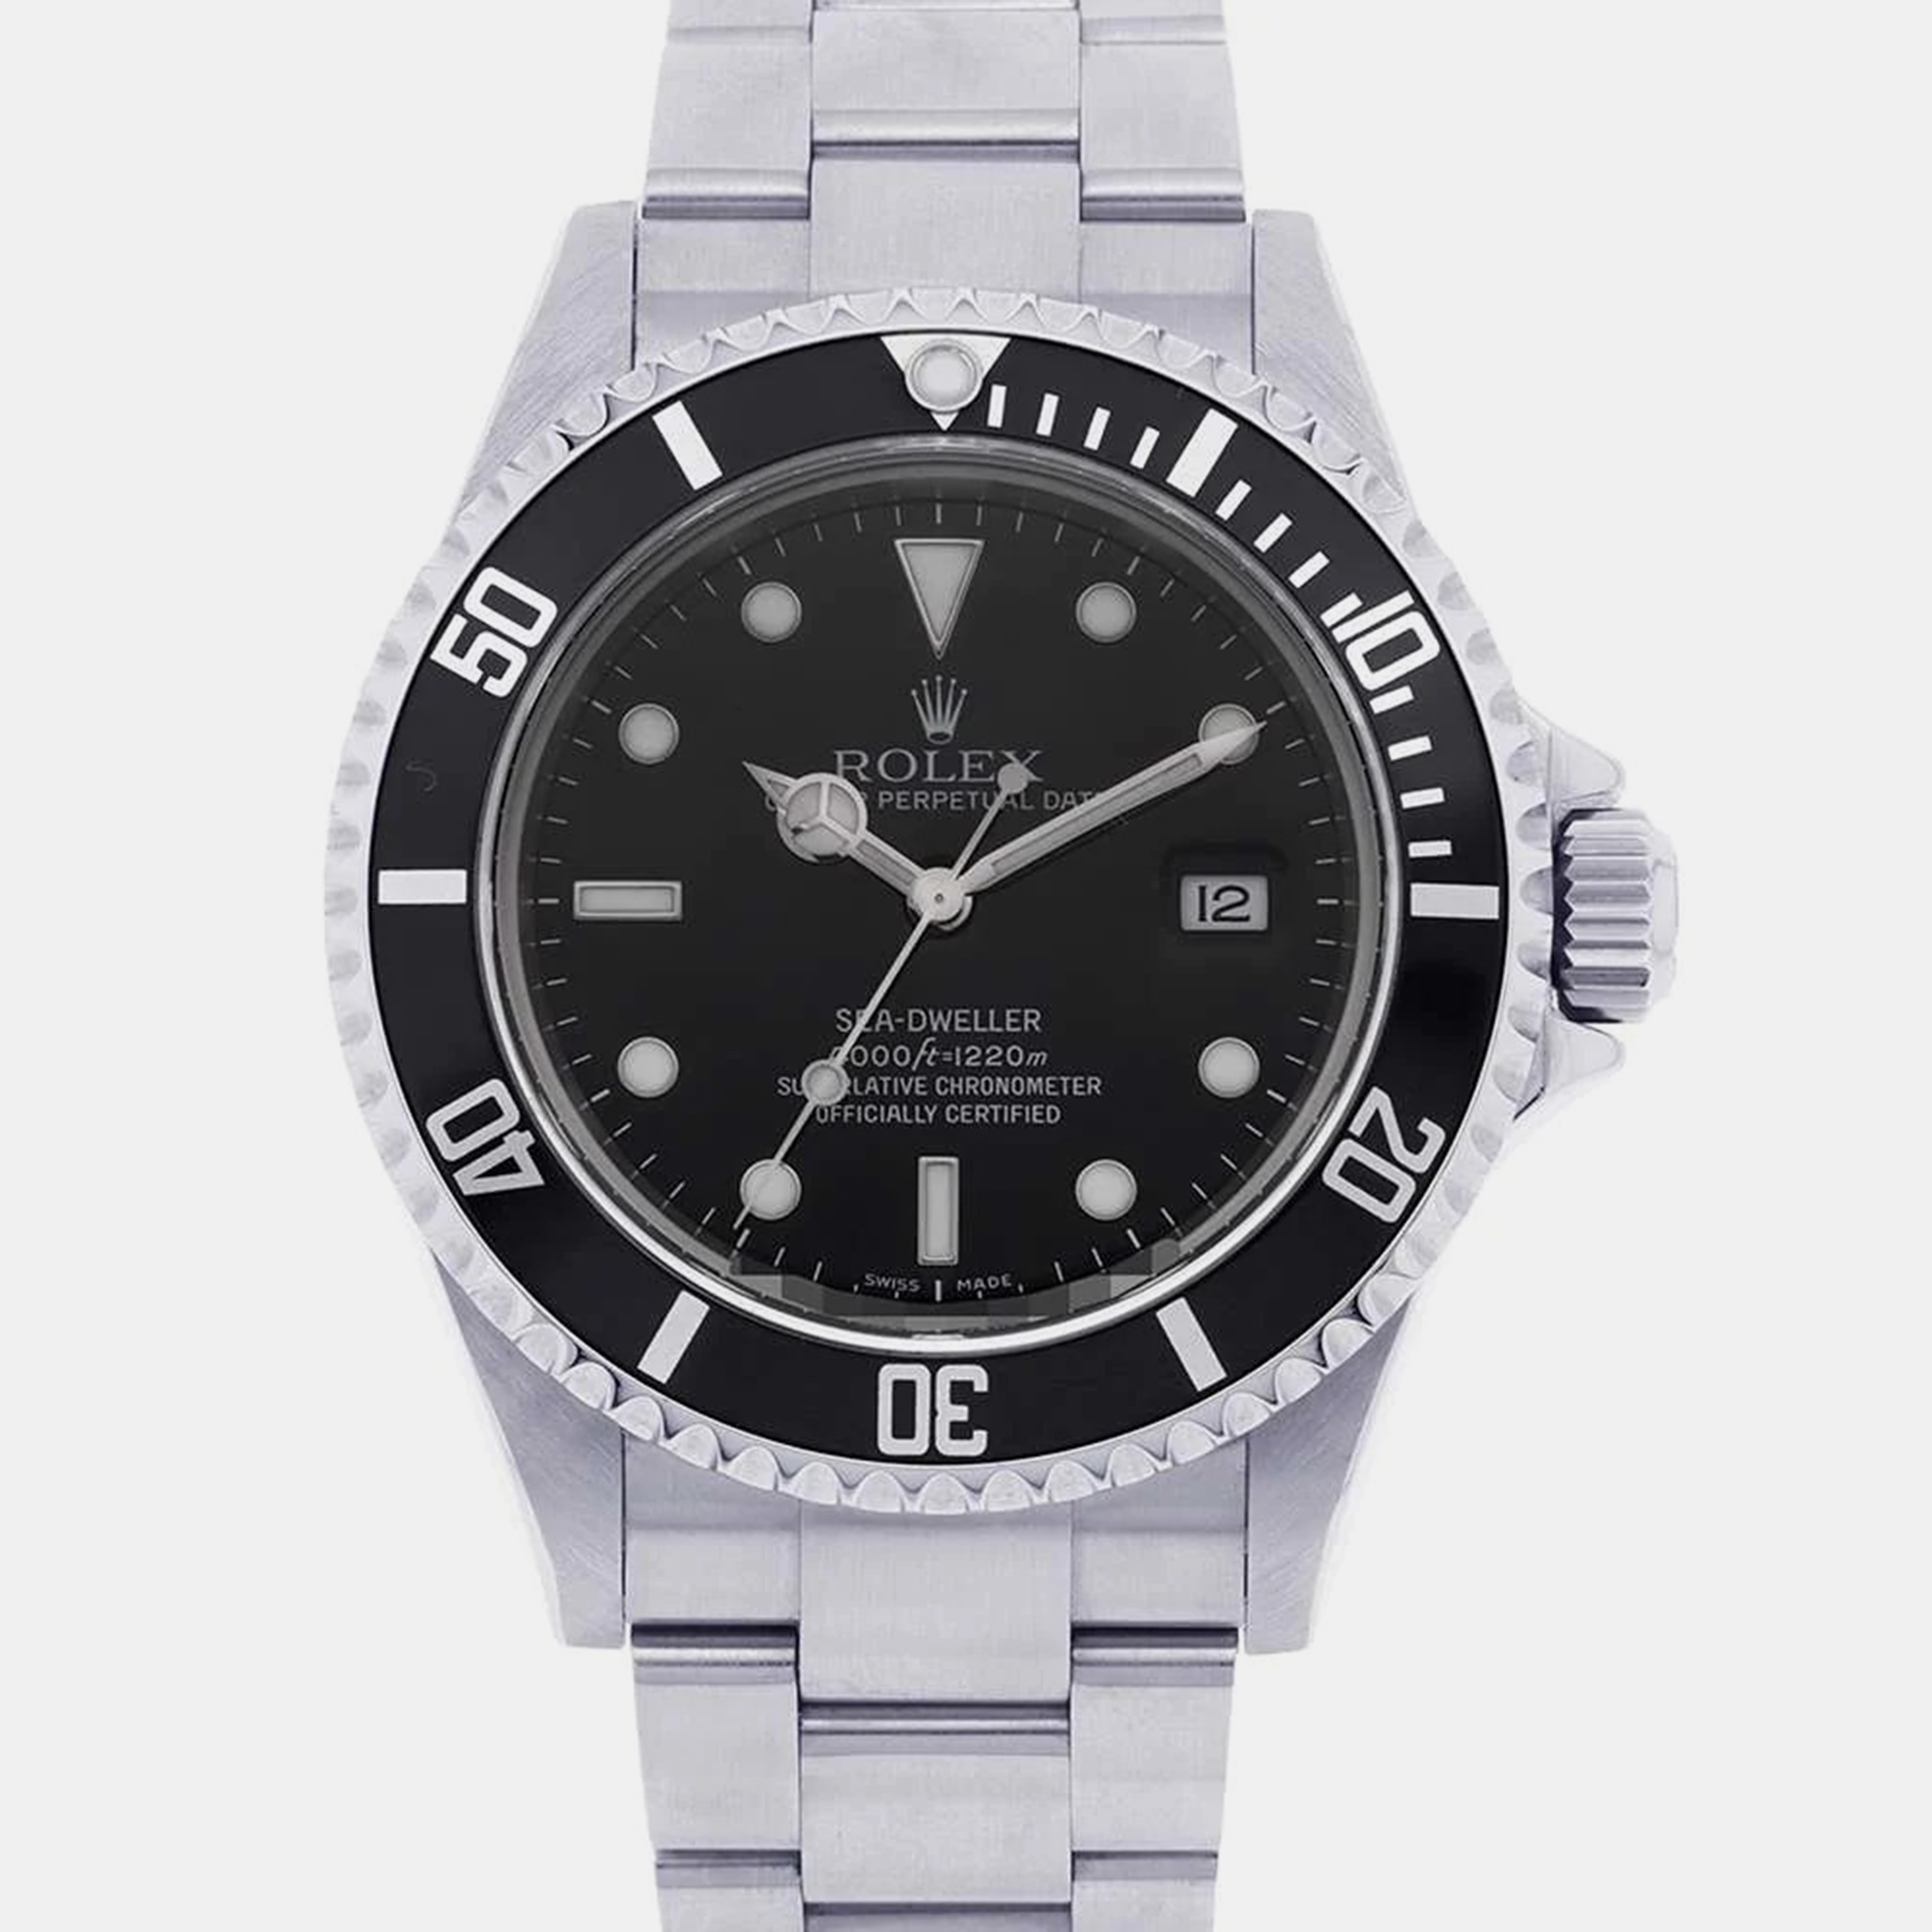 Pre-owned Rolex Black Stainless Steel Sea-dweller 16600 Automatic Men's Wristwatch 40 Mm